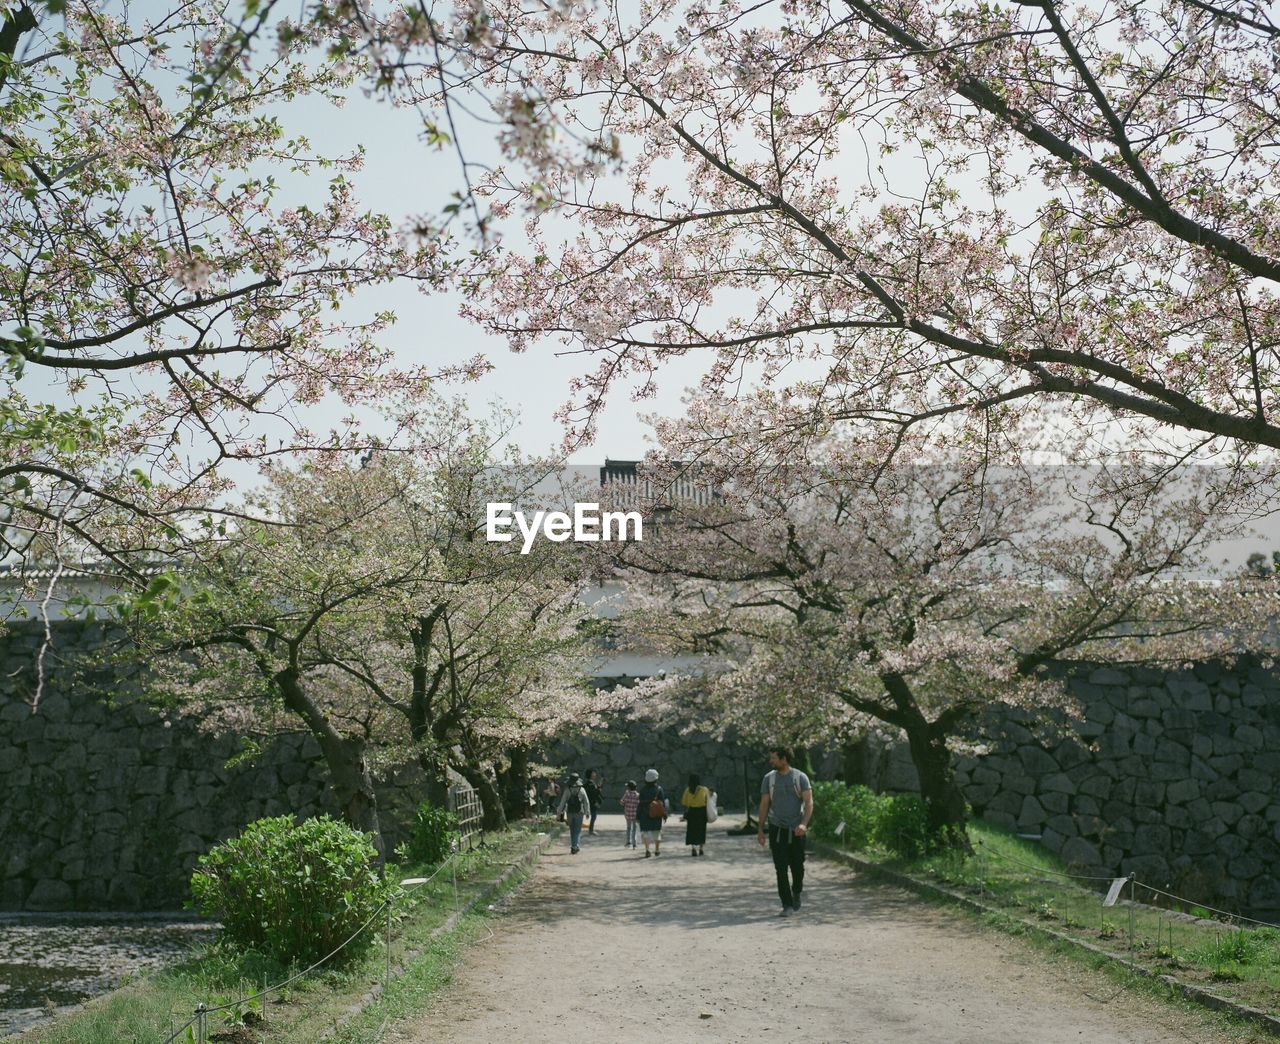 REAR VIEW OF PEOPLE WALKING ON CHERRY BLOSSOM TREES